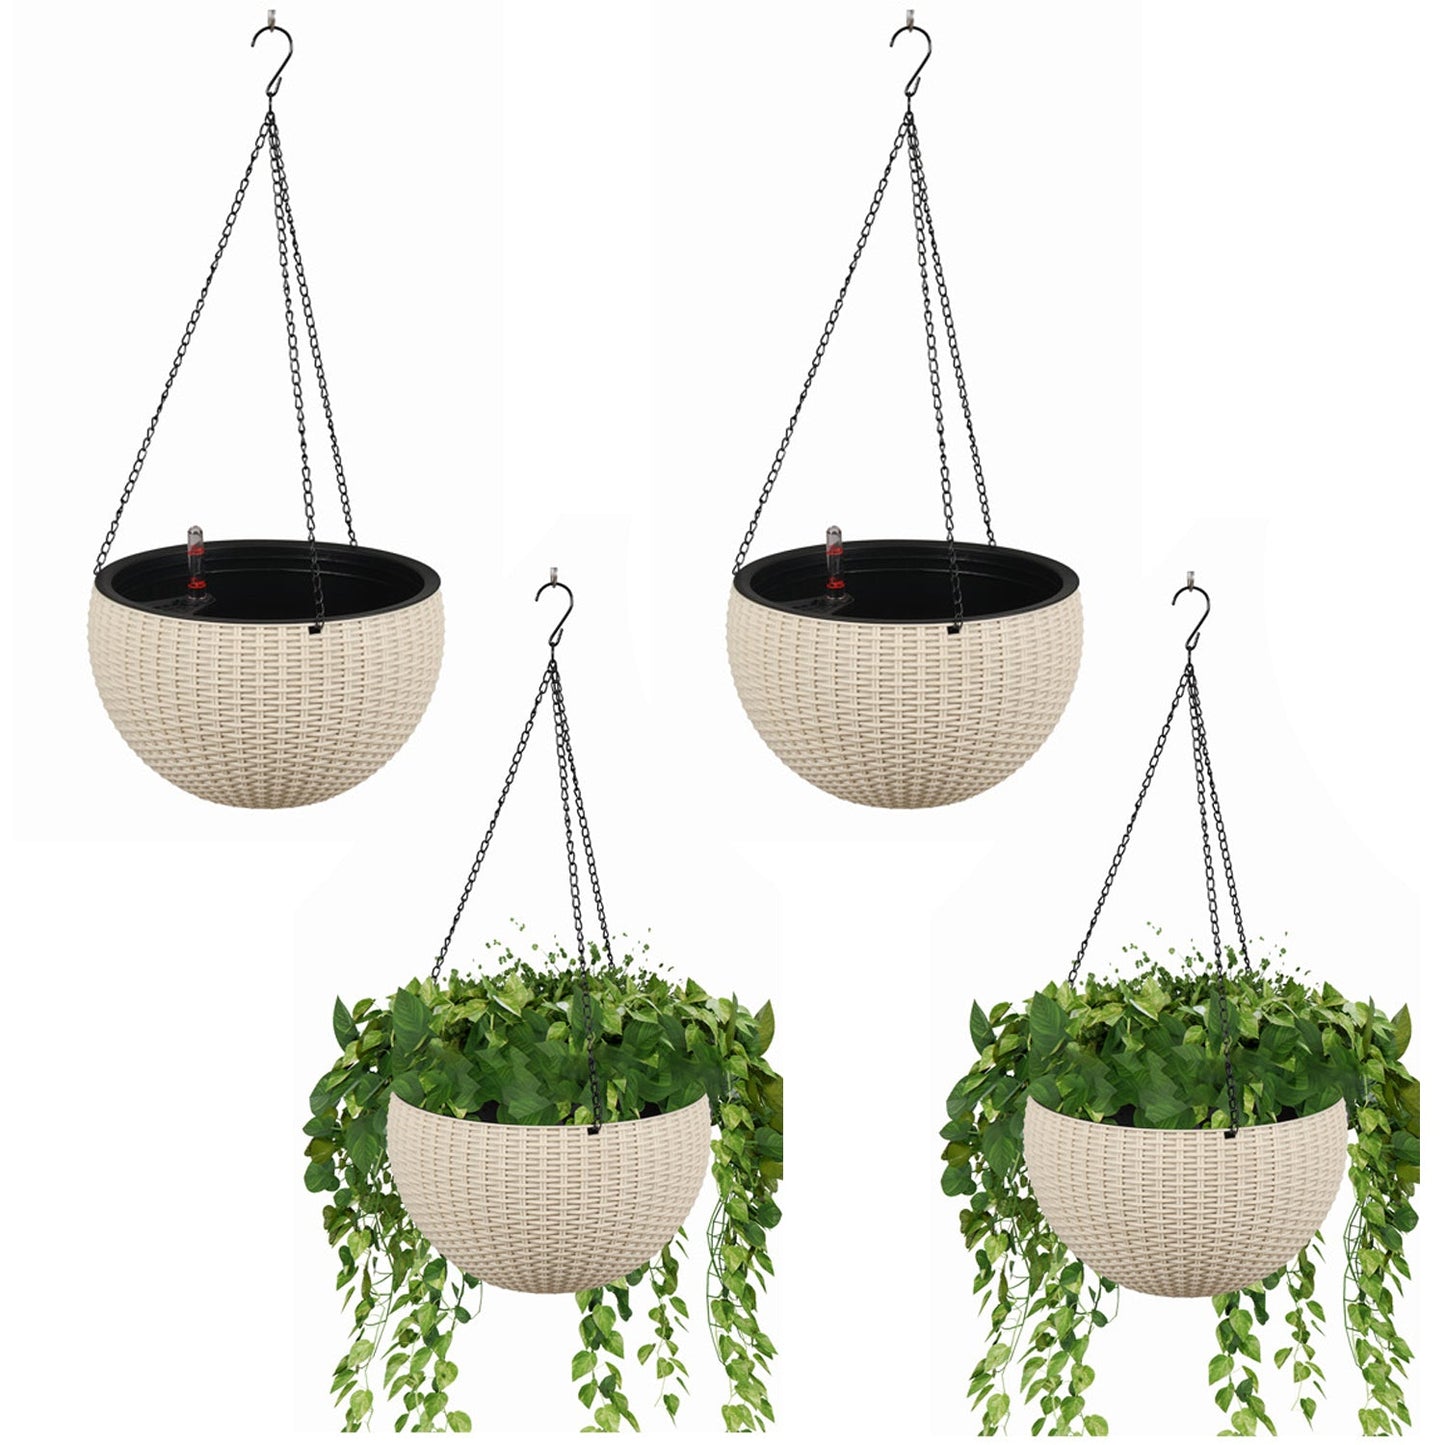 4 pack Self-Watering Hanging Planters, with Water Level Indicator, Drainer and Chain  Aoodor  White  